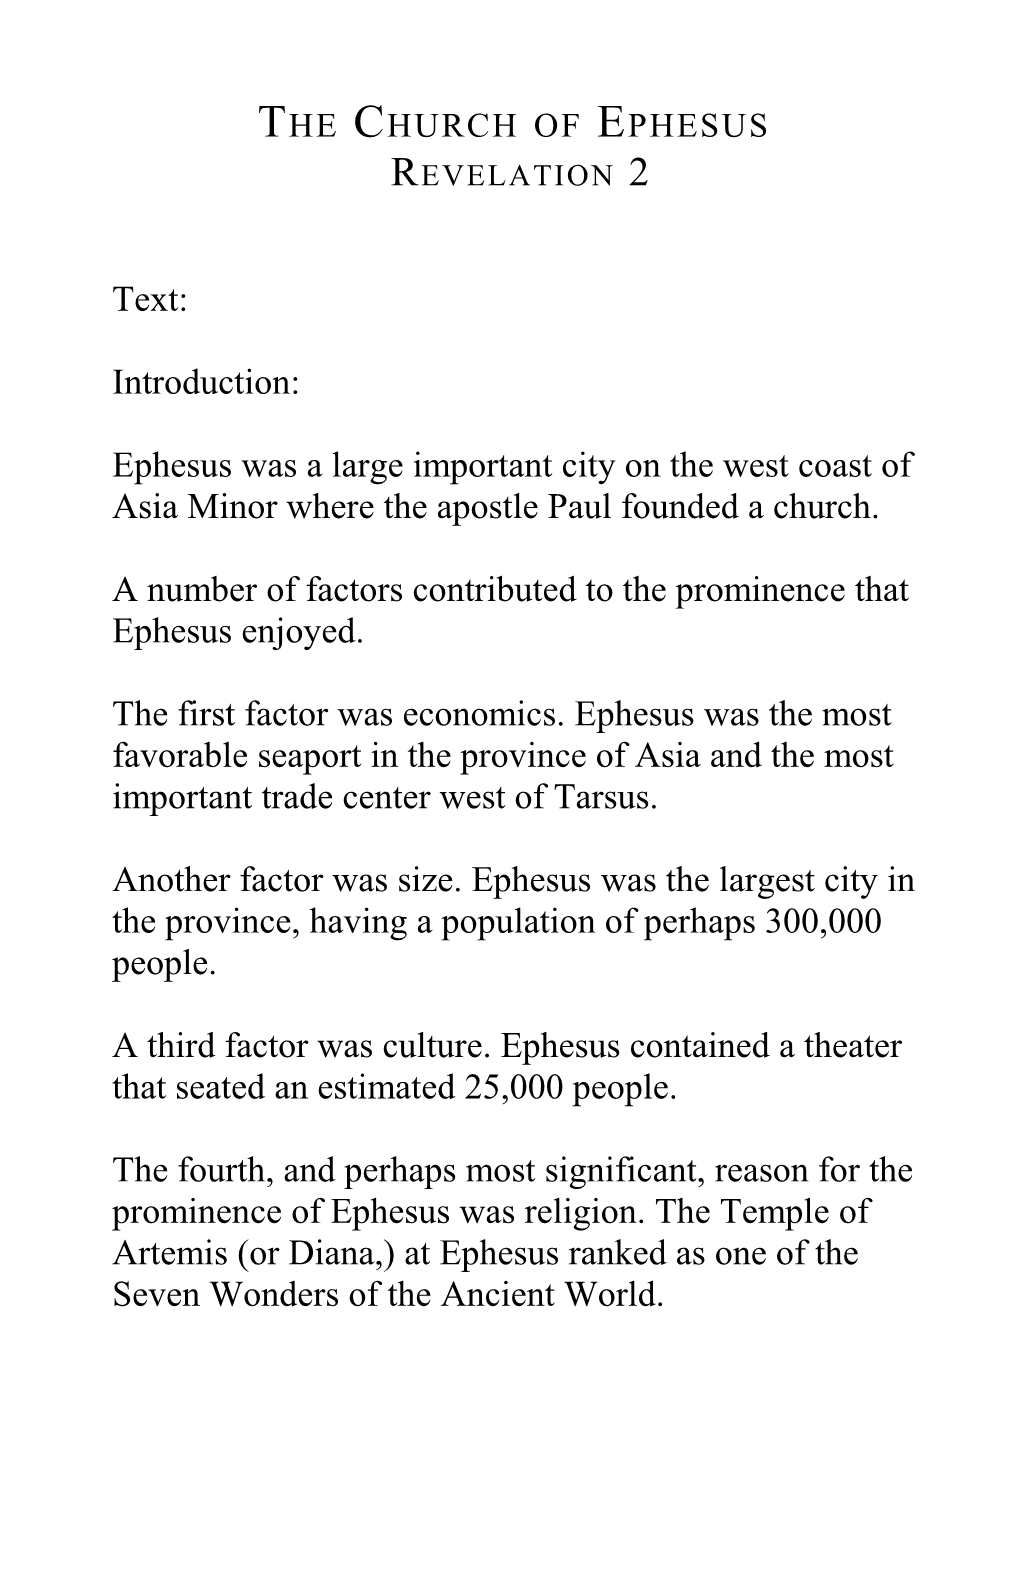 A Number of Factors Contributed to the Prominence That Ephesus Enjoyed